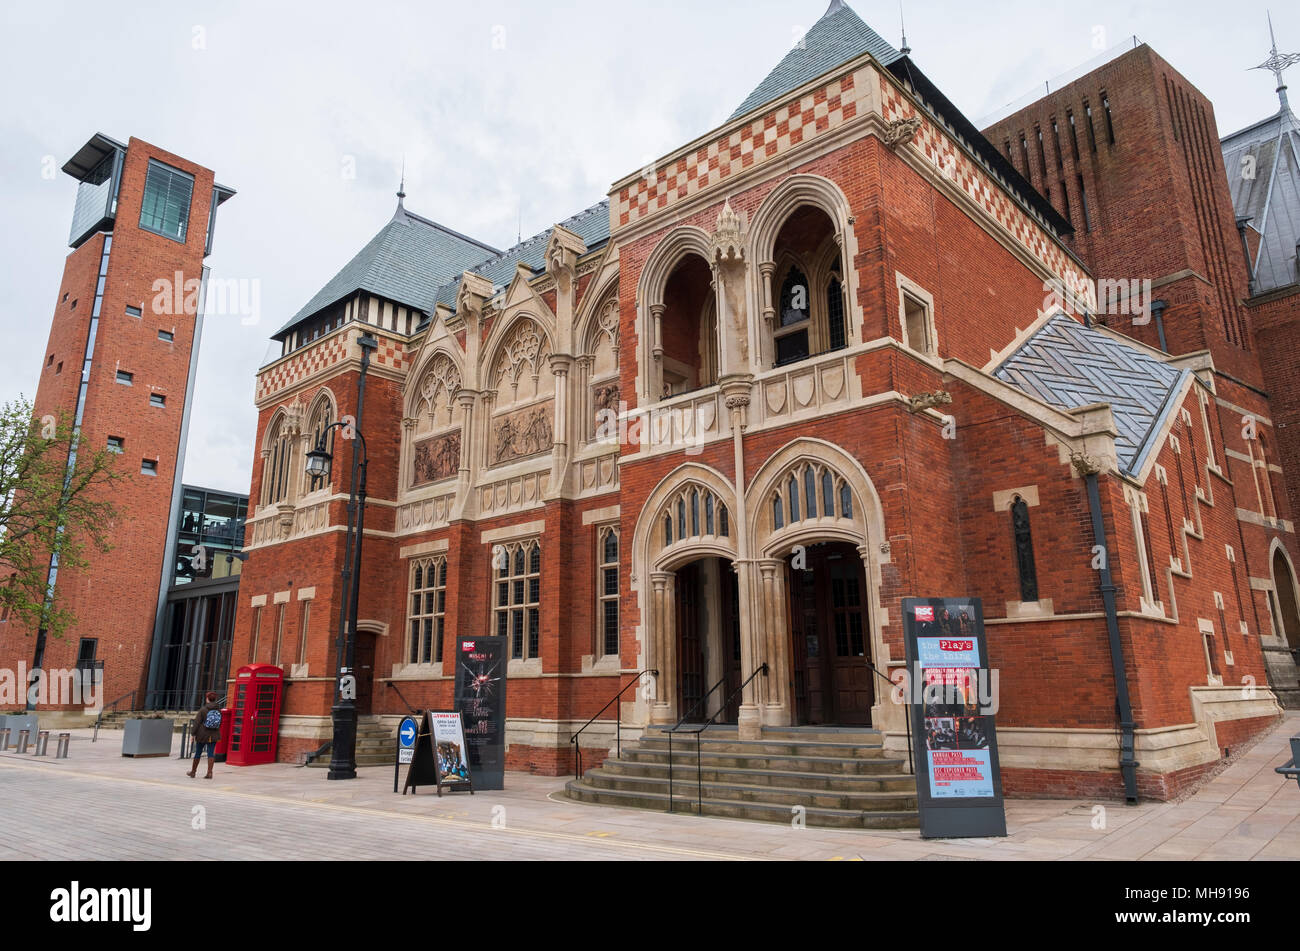 Exterior view of the famous Royal Shakespeare Theatre in Stratford upon Avon, Warwickshire, England. Stock Photo